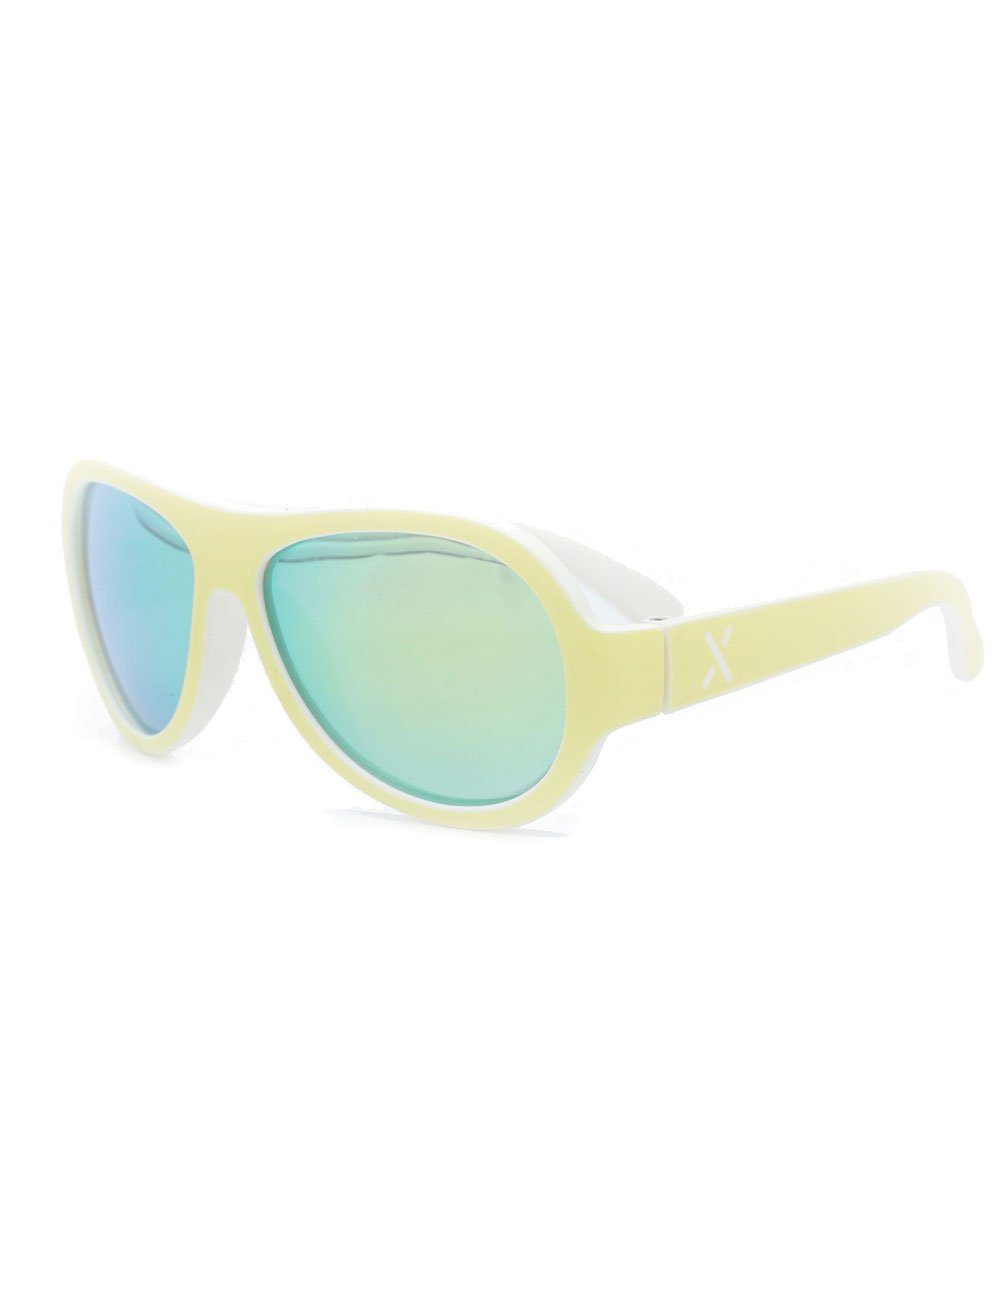 KIDS-Sonnenbrille pale yellow Sonnenbrille inkl.Box,Microfaserb. 'round', MAXIMO